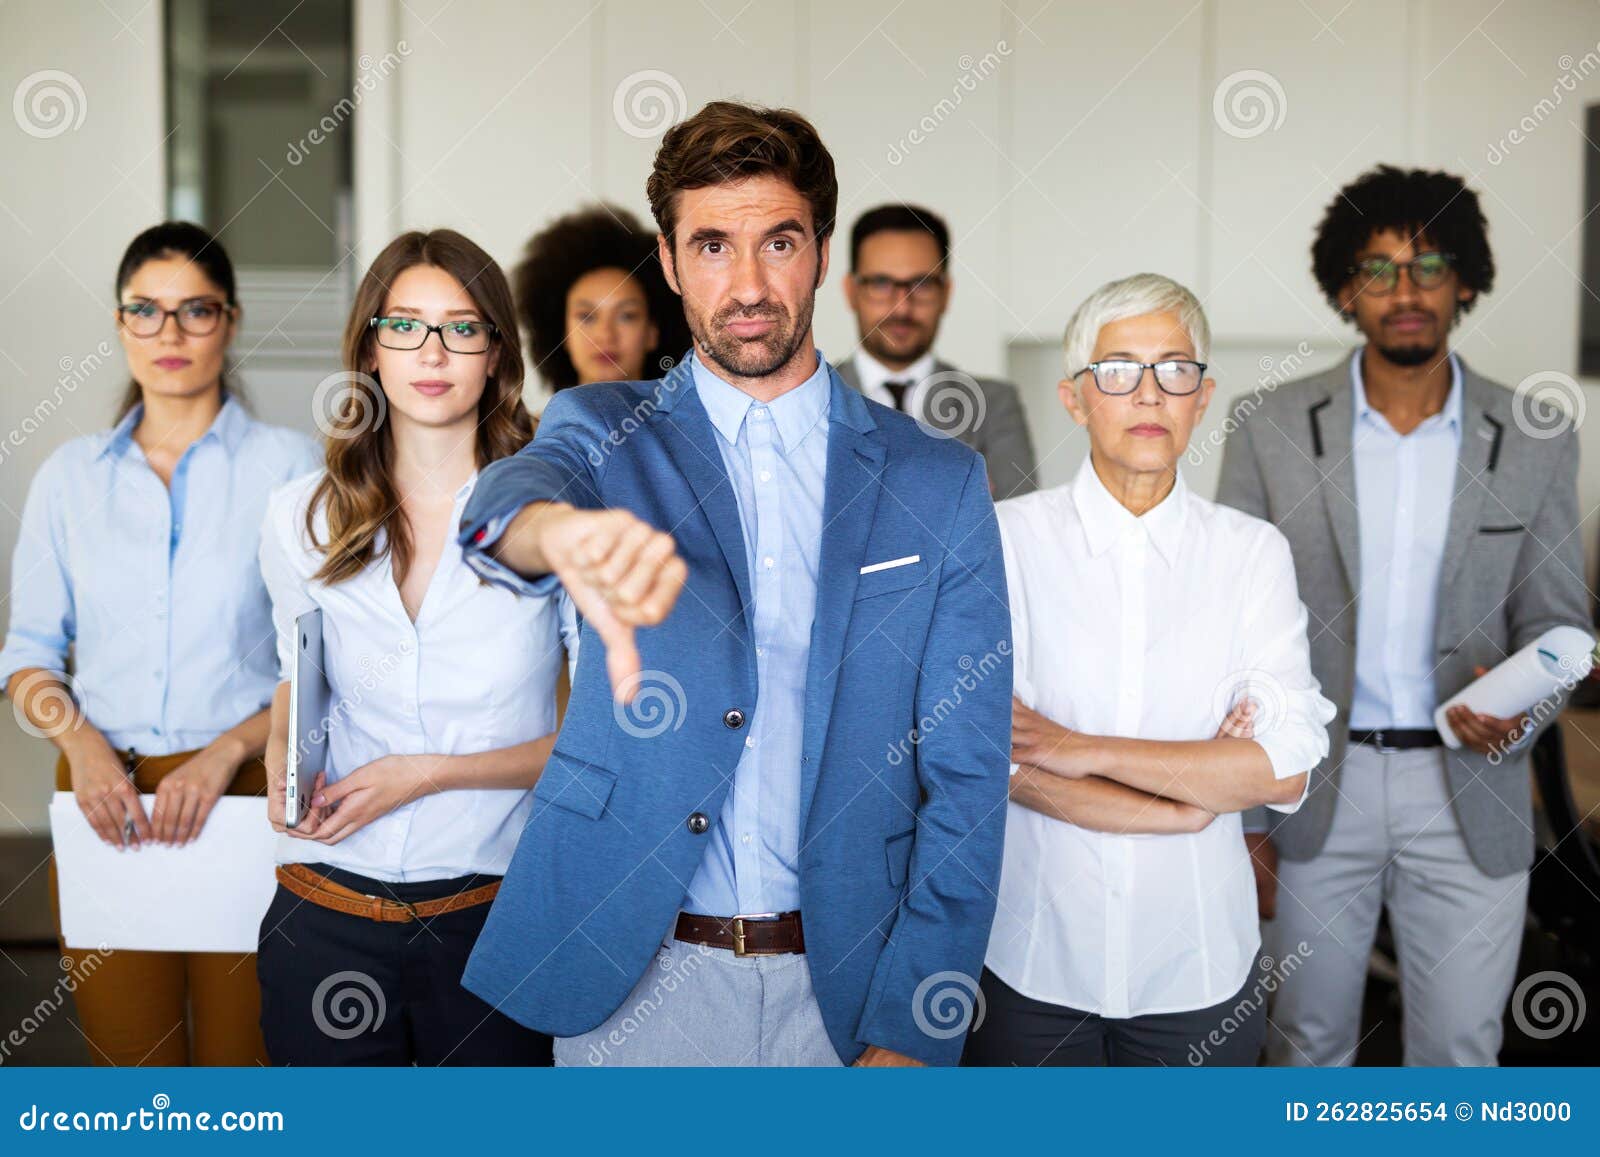 Group Of Unsuccessful Business People And Badly Managed Company Leads